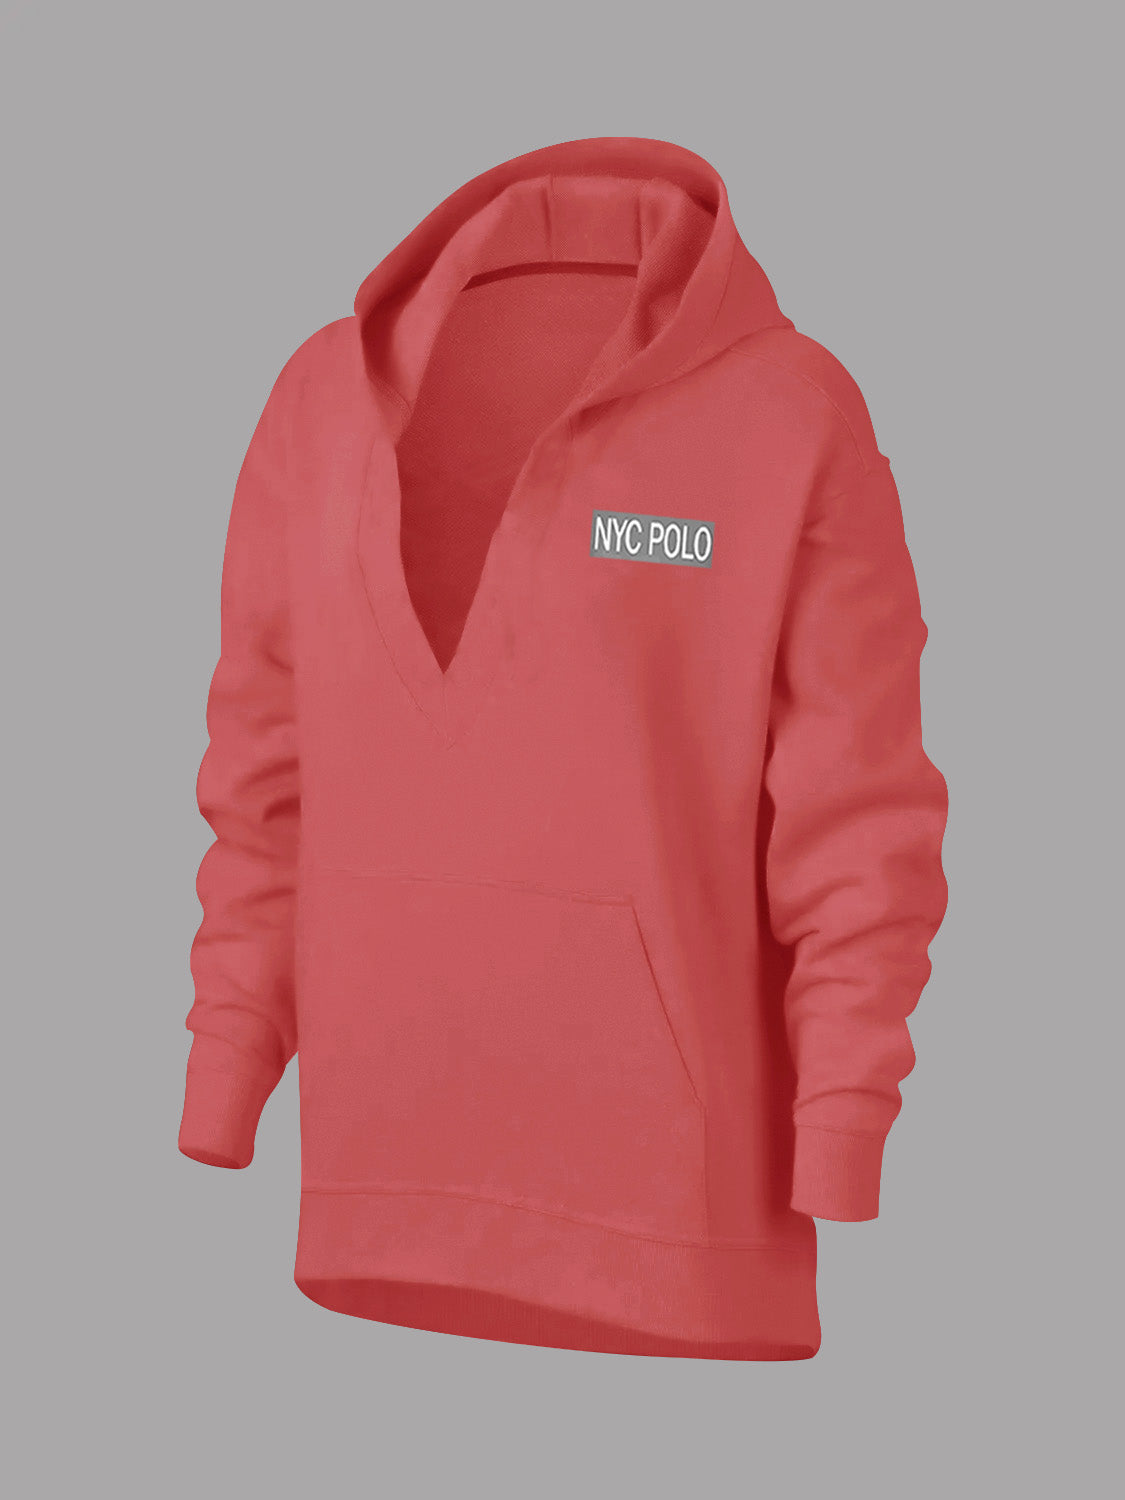 Nyc Polo Terry Fleece V Neck Hoodie For Ladies-Pink-SP1559